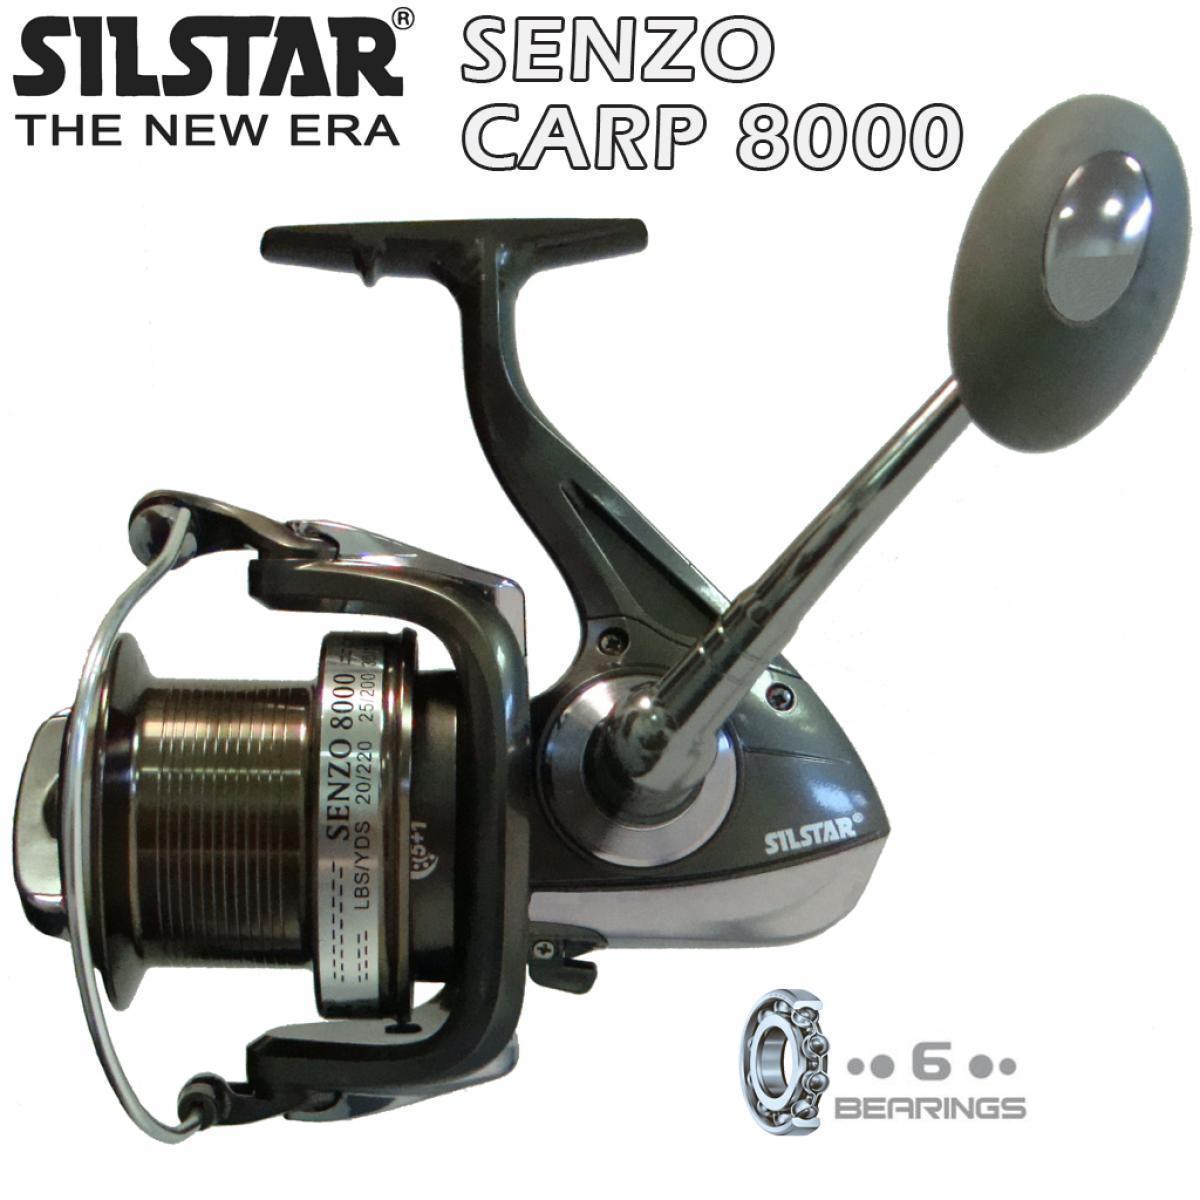 Fishing, Fishing Reels, Remote throw spindle